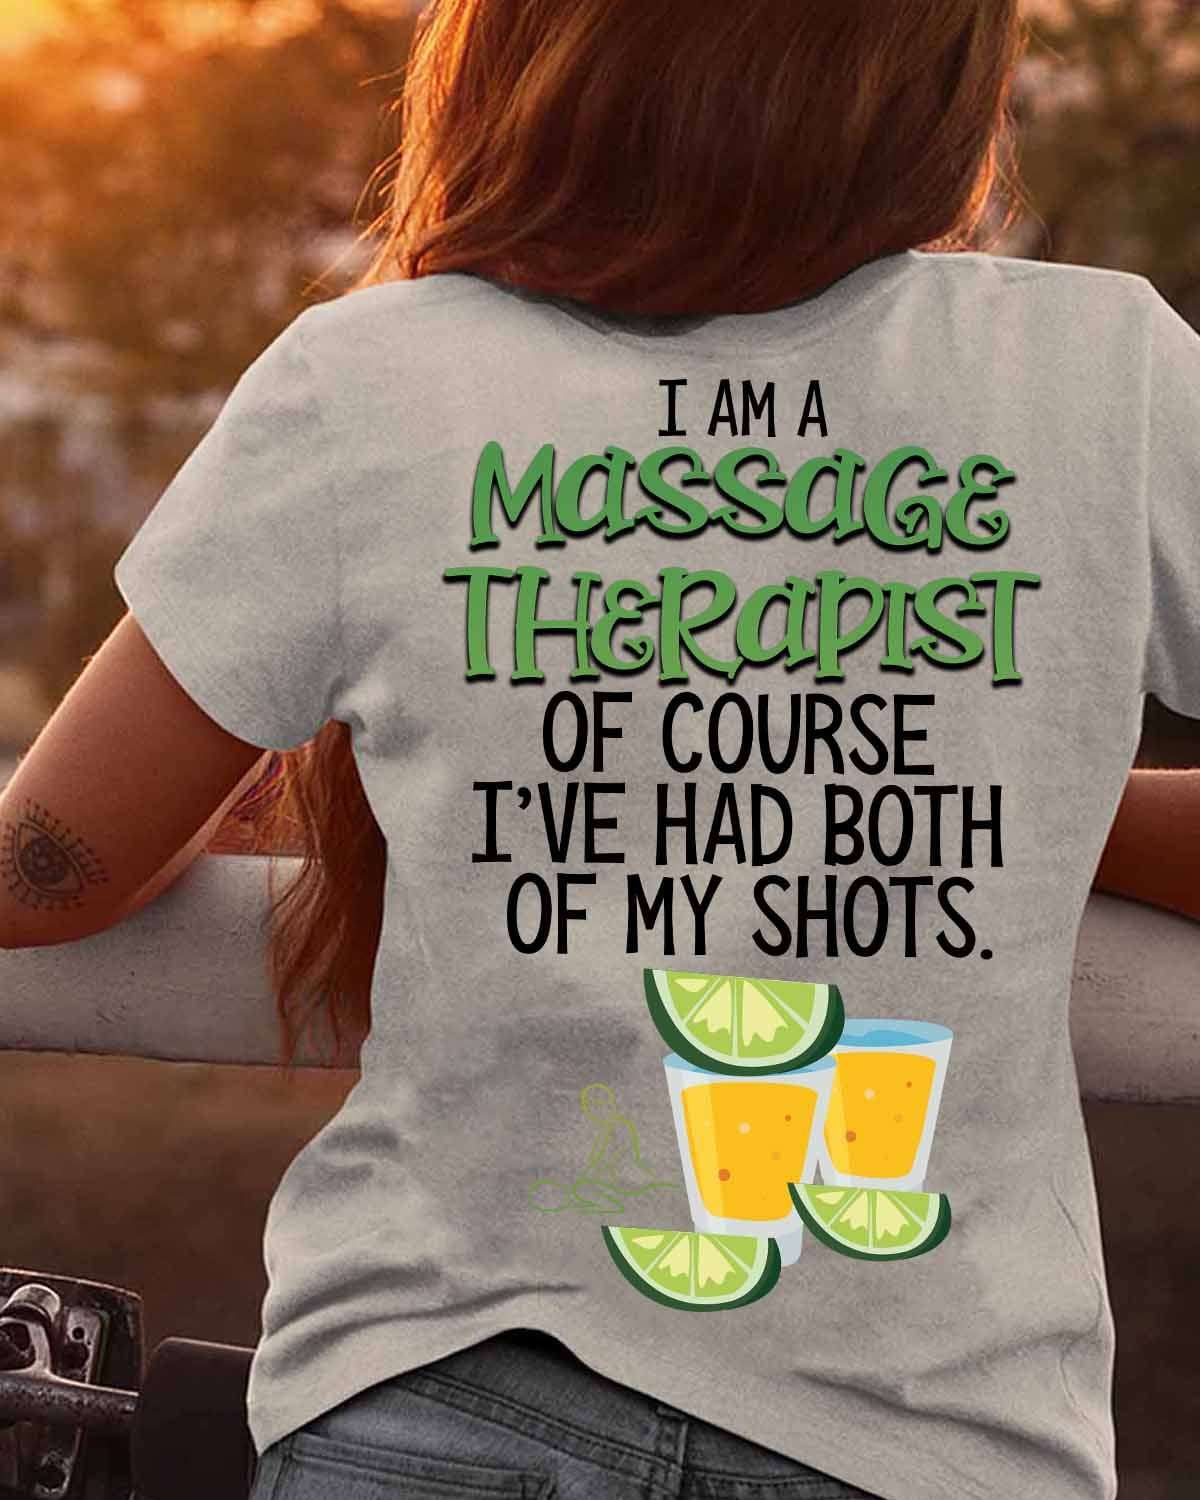 I am a massage therapist of course i've had both of myy shots